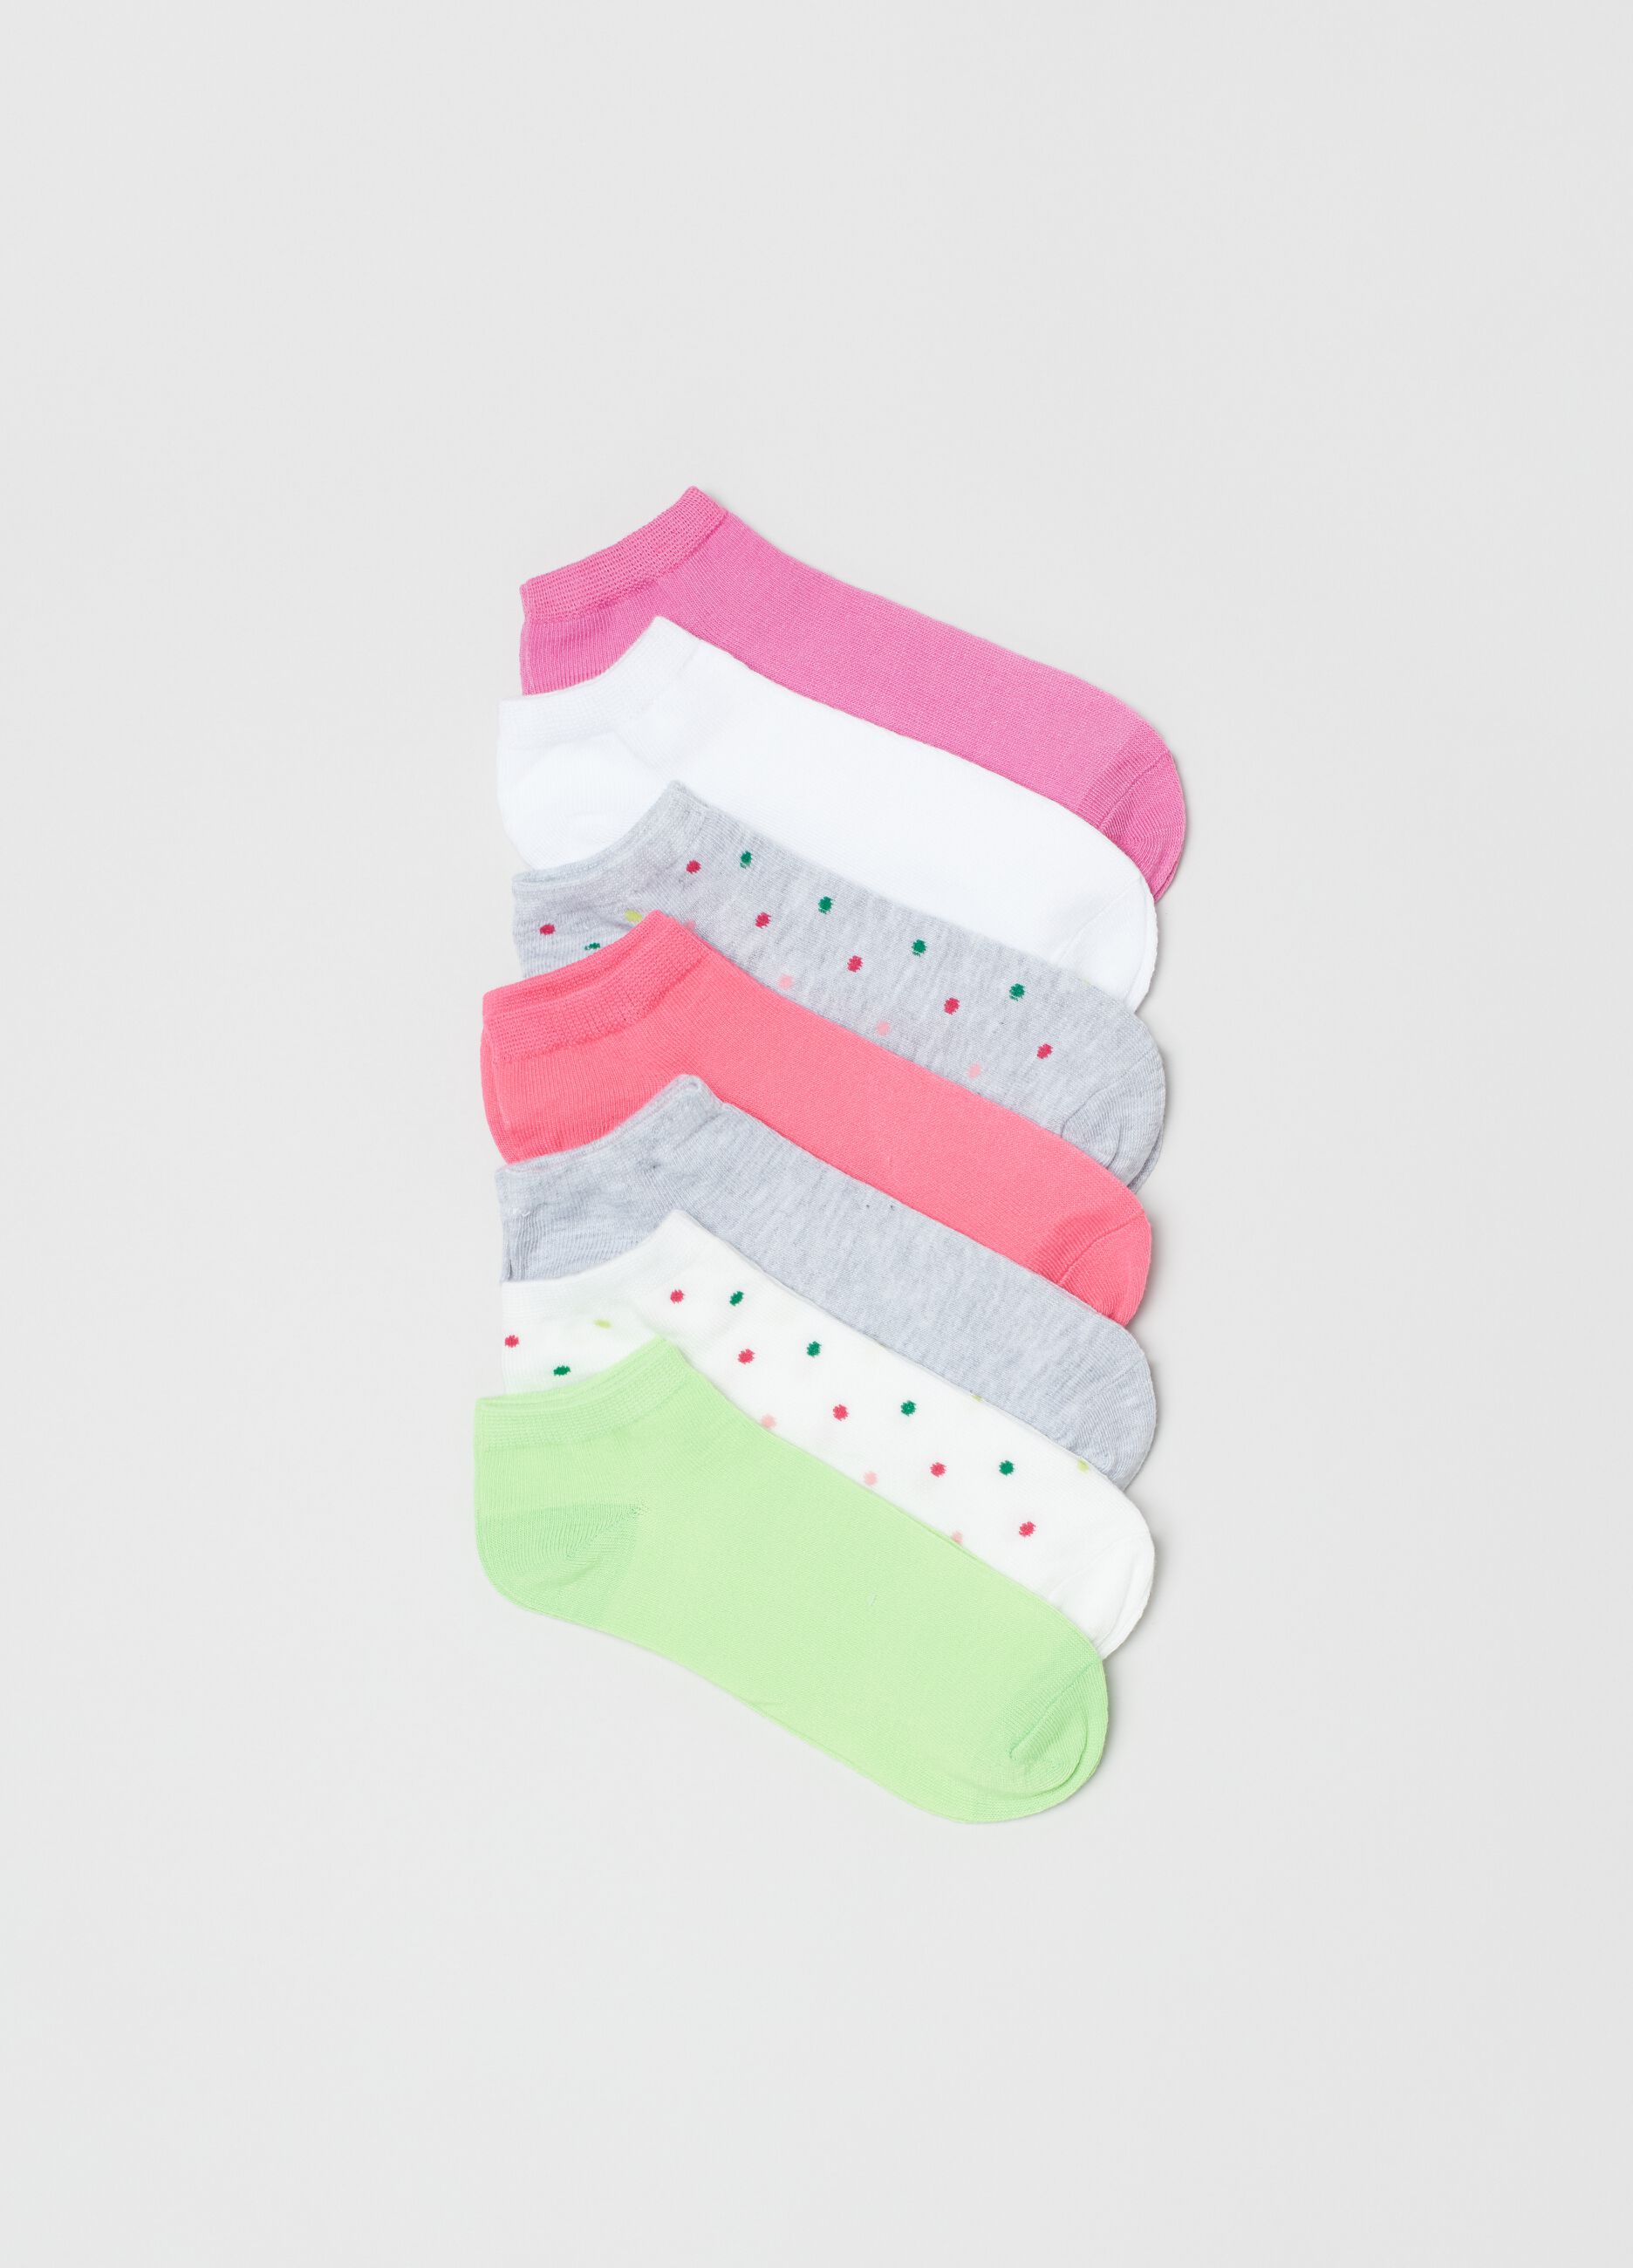 Seven-pair pack of shoe liners with polka dot pattern